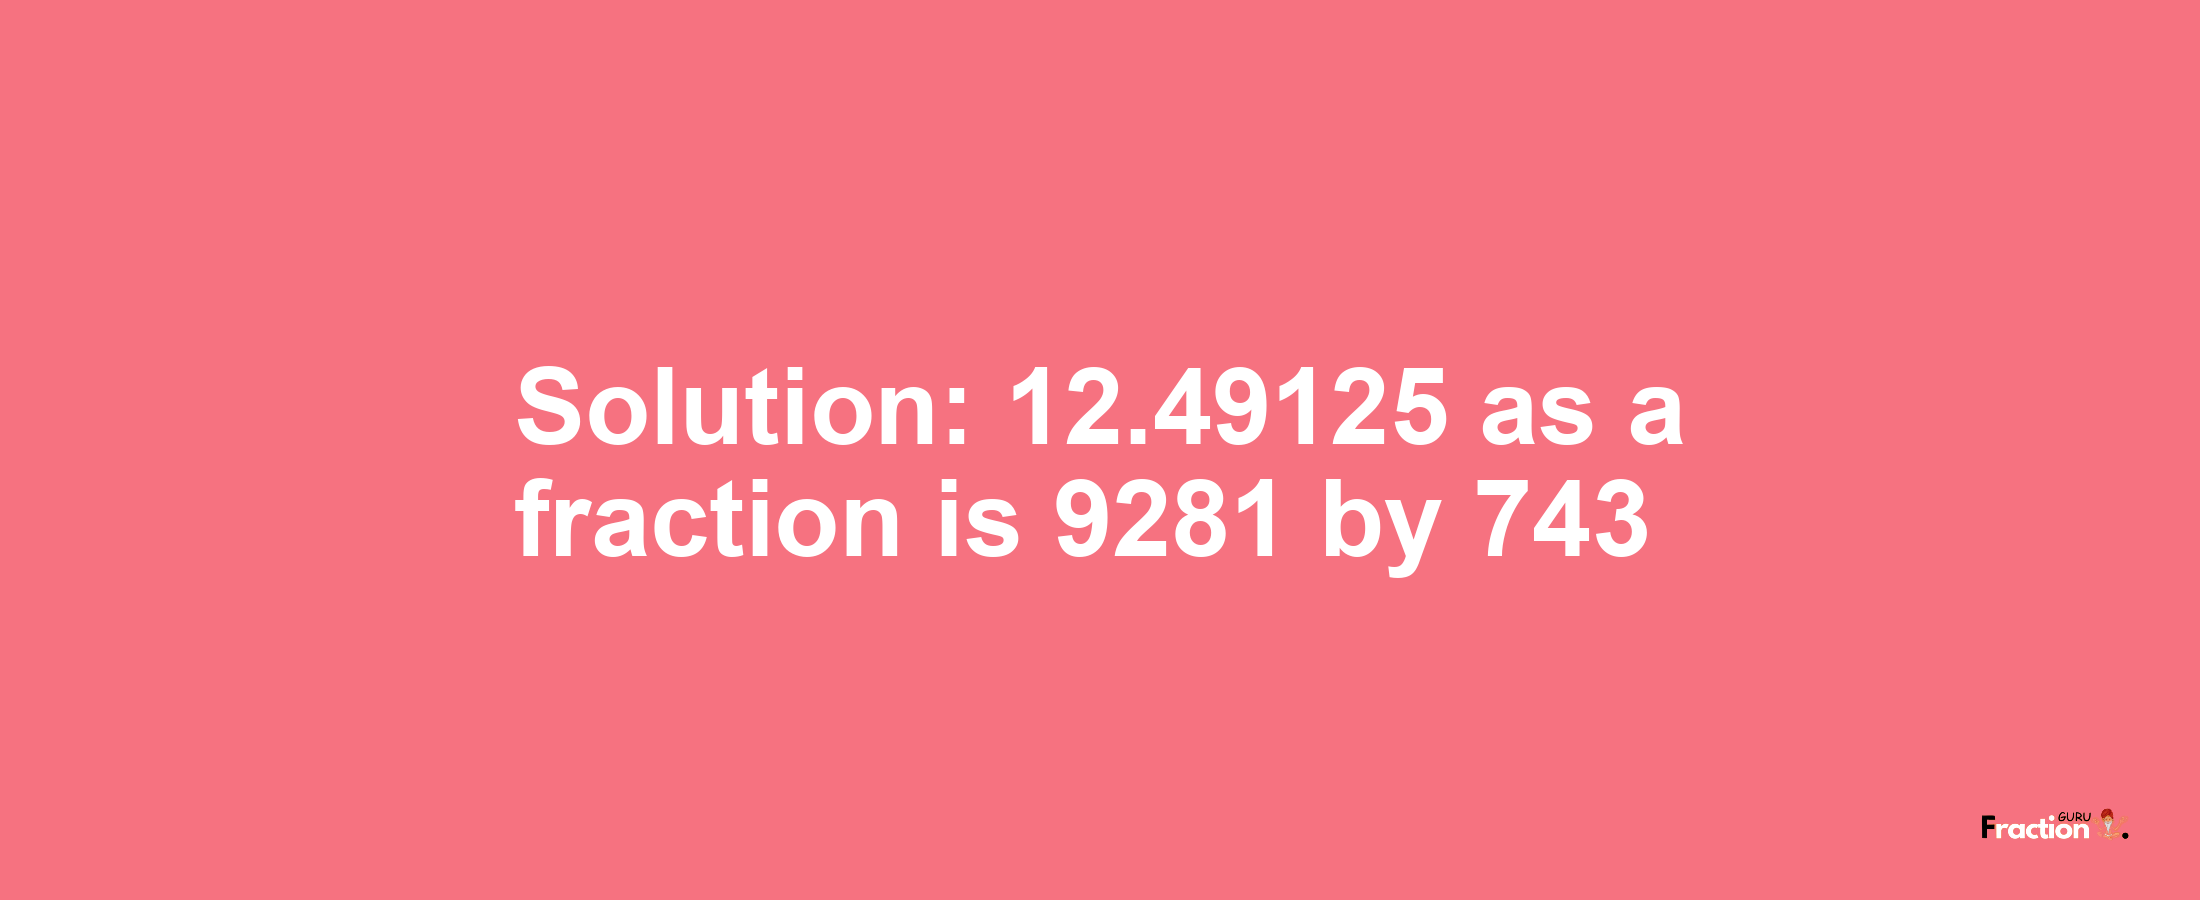 Solution:12.49125 as a fraction is 9281/743